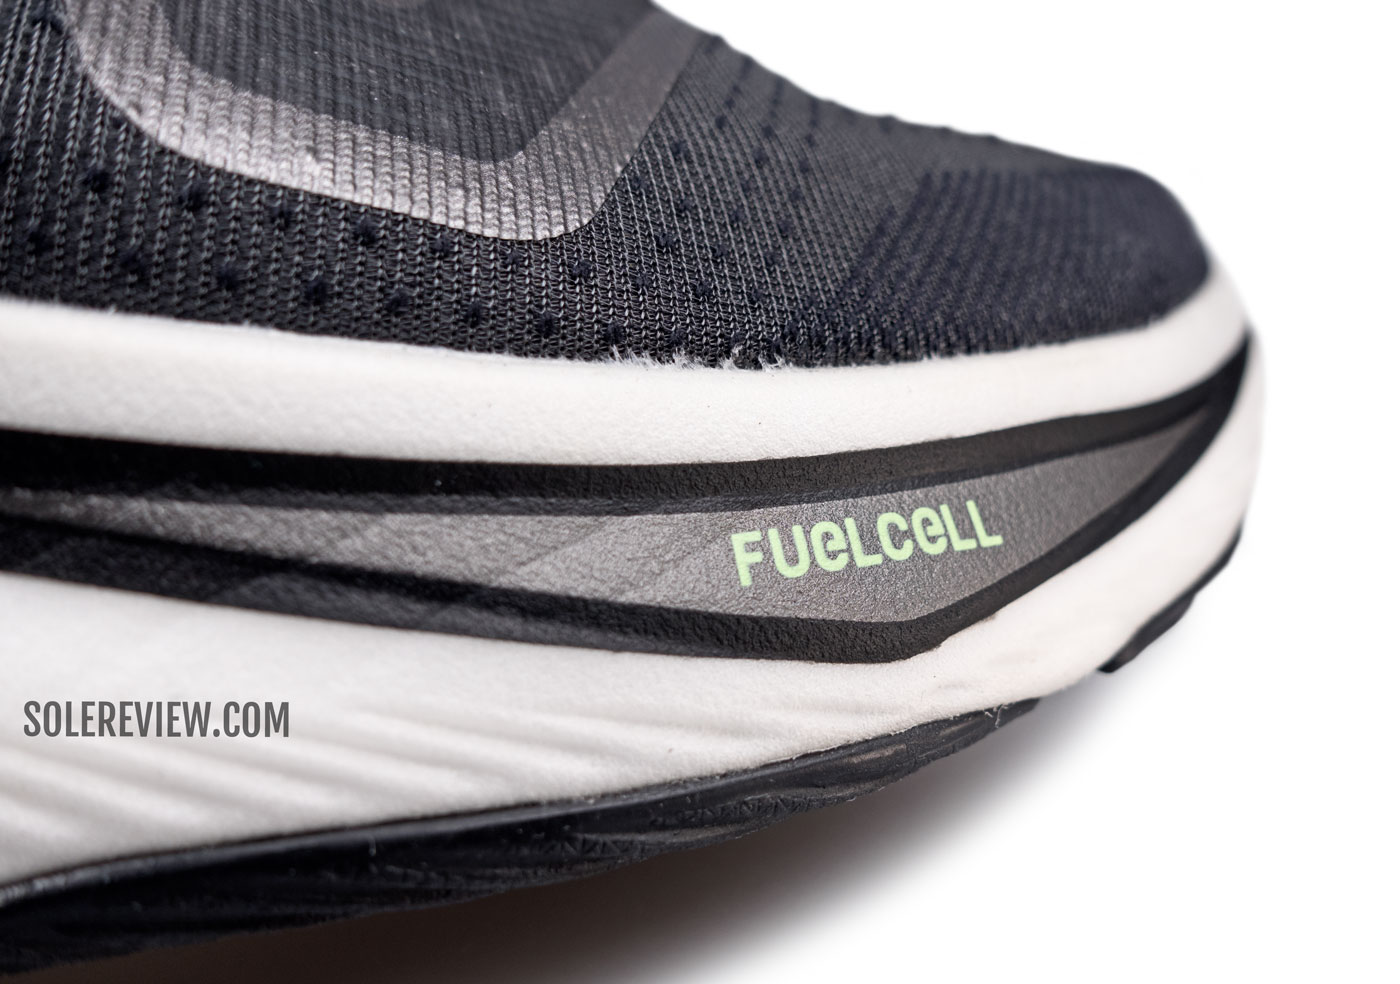 The Fuelcell foam midsole of the New Balance Rebel V3.